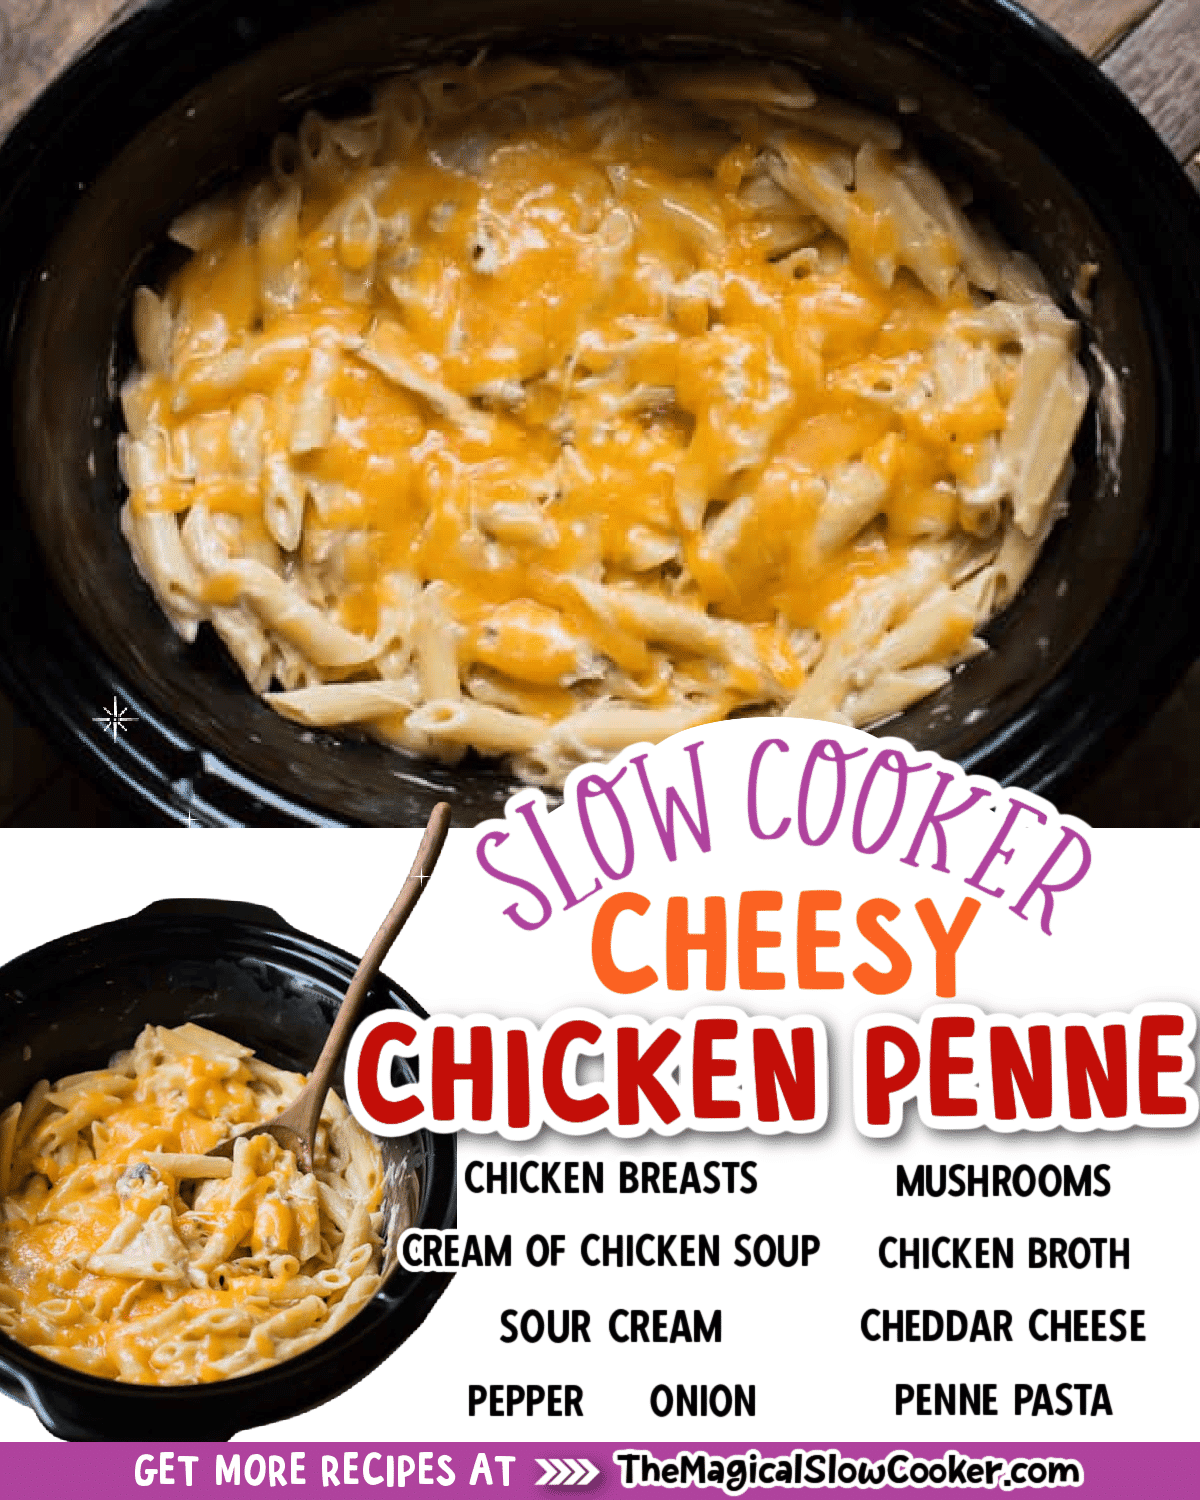 Collage of cheesy chicken penne images with text of what ingredients are.